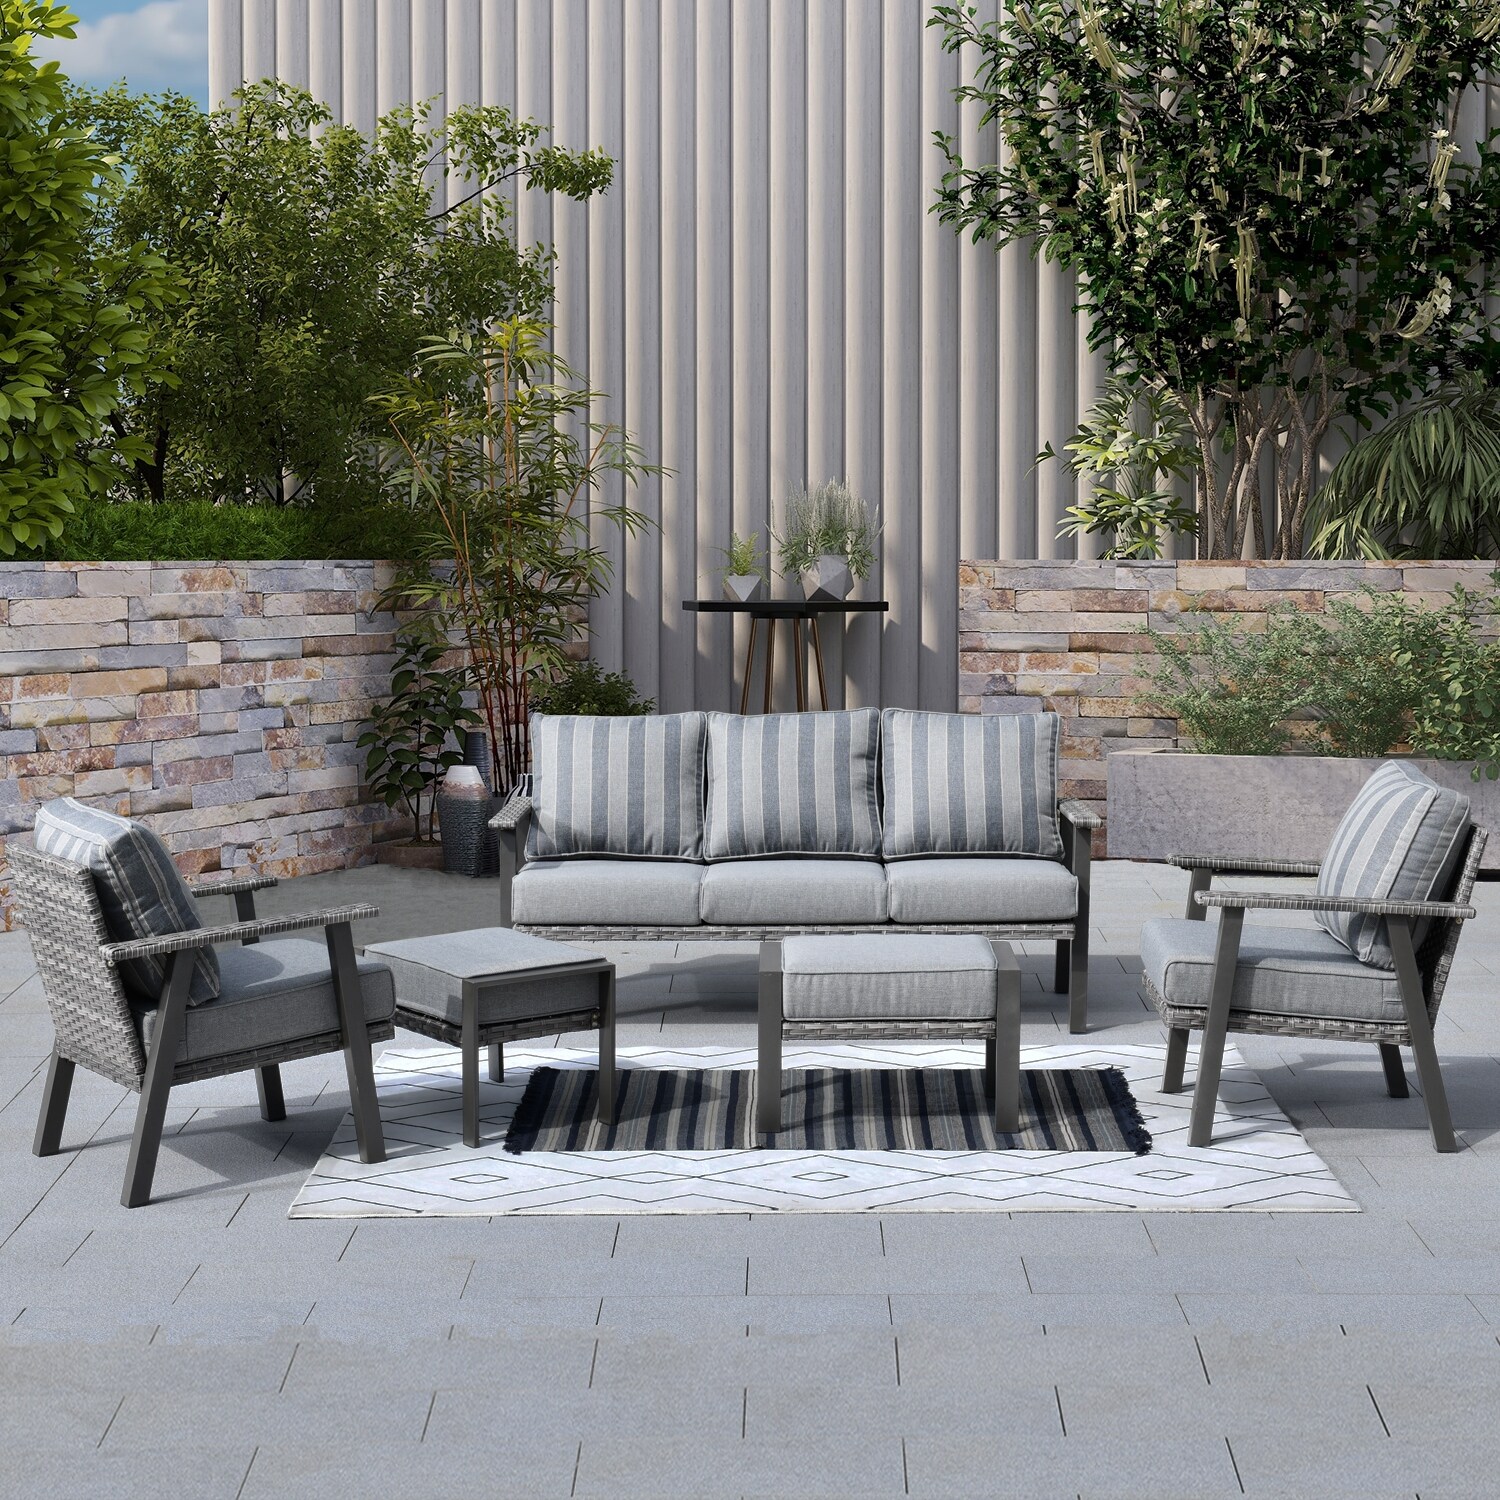 Ovios 5-piece Outdoor Wicker Stripes Pattern Cushion Sectional Set